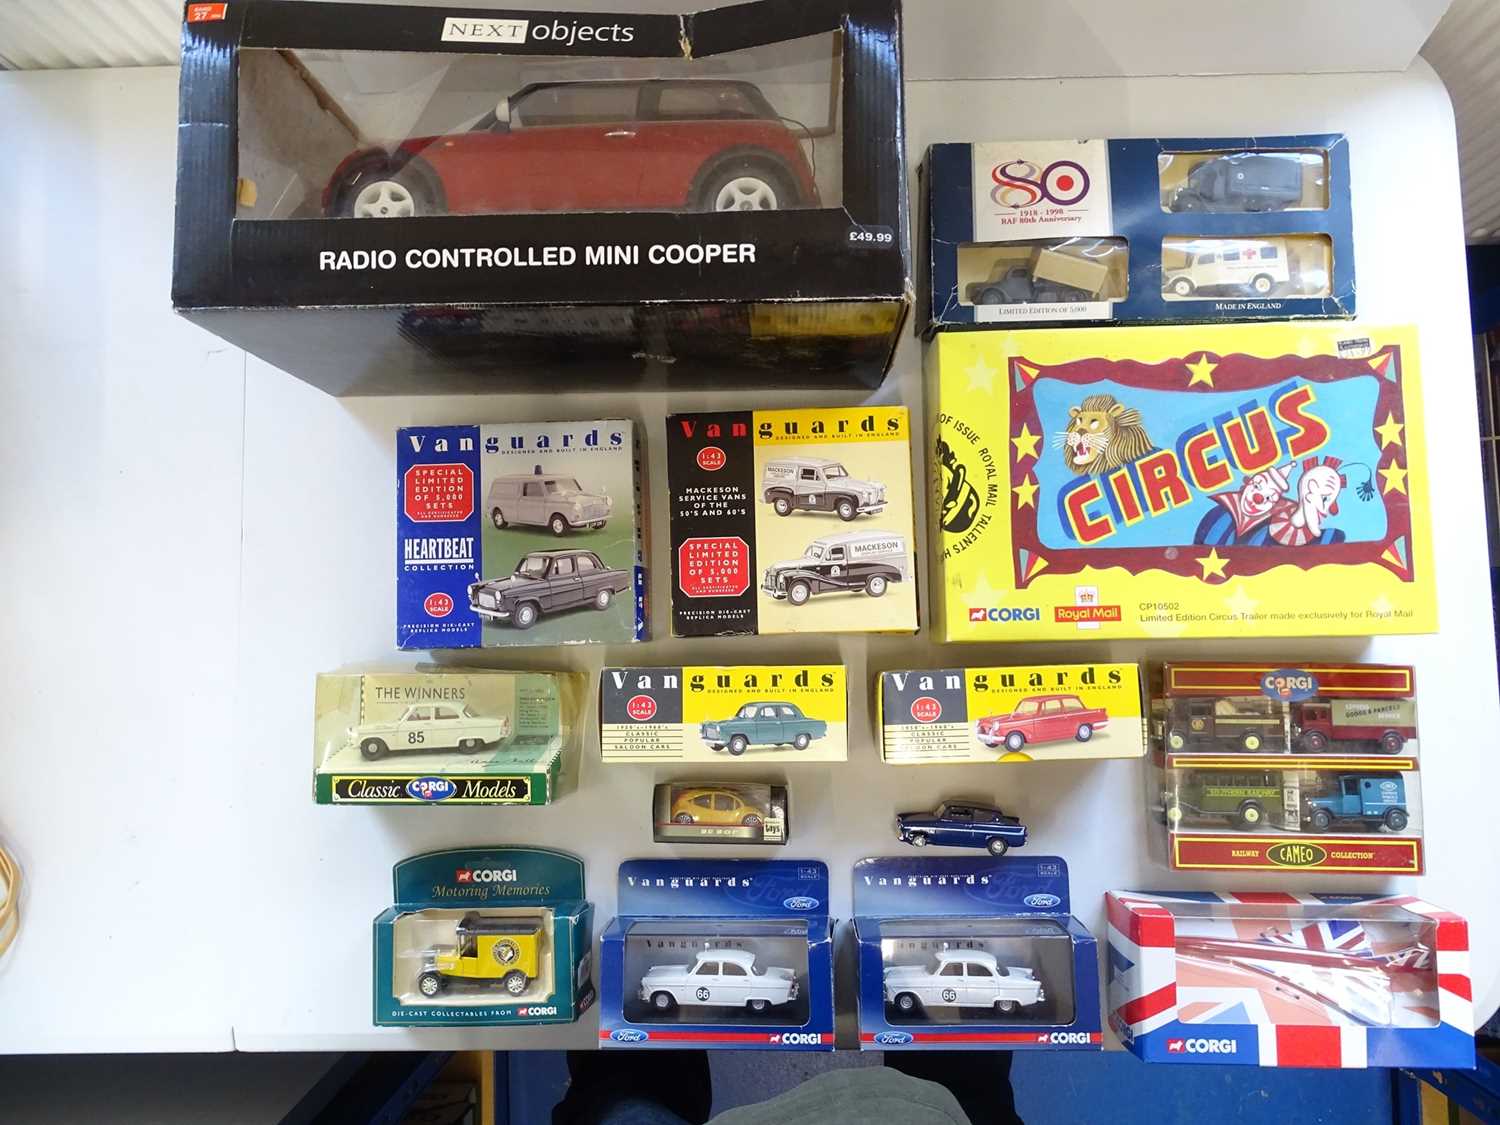 A large tray of modern diecast cars, vans and lorries by CORGI, VANGUARDS etc, together with a